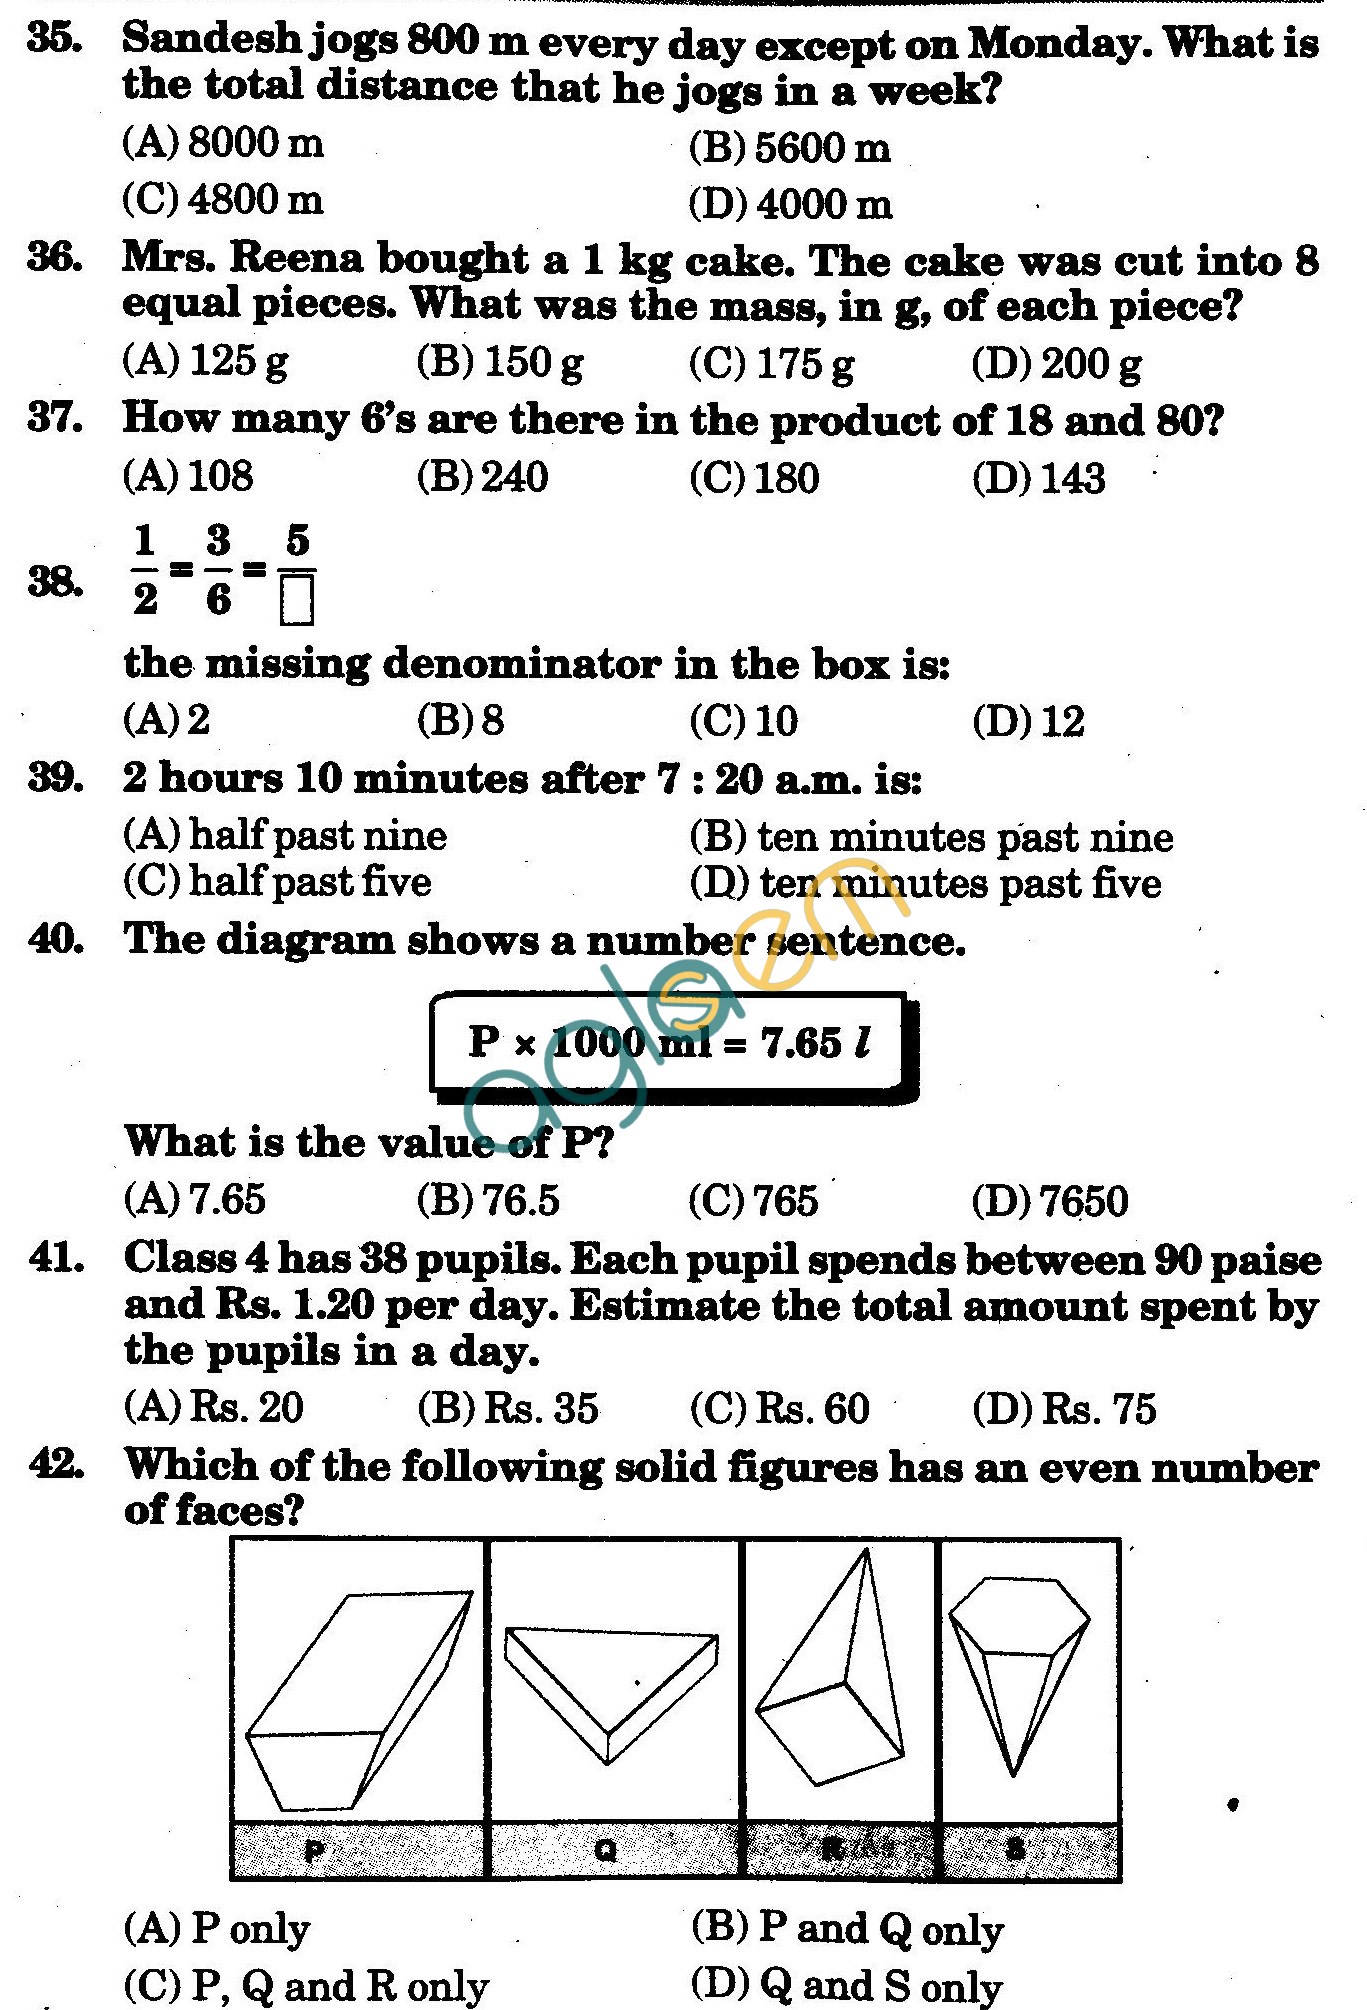 NSTSE 2010 Class IV Question Paper with Answers - Mathematics